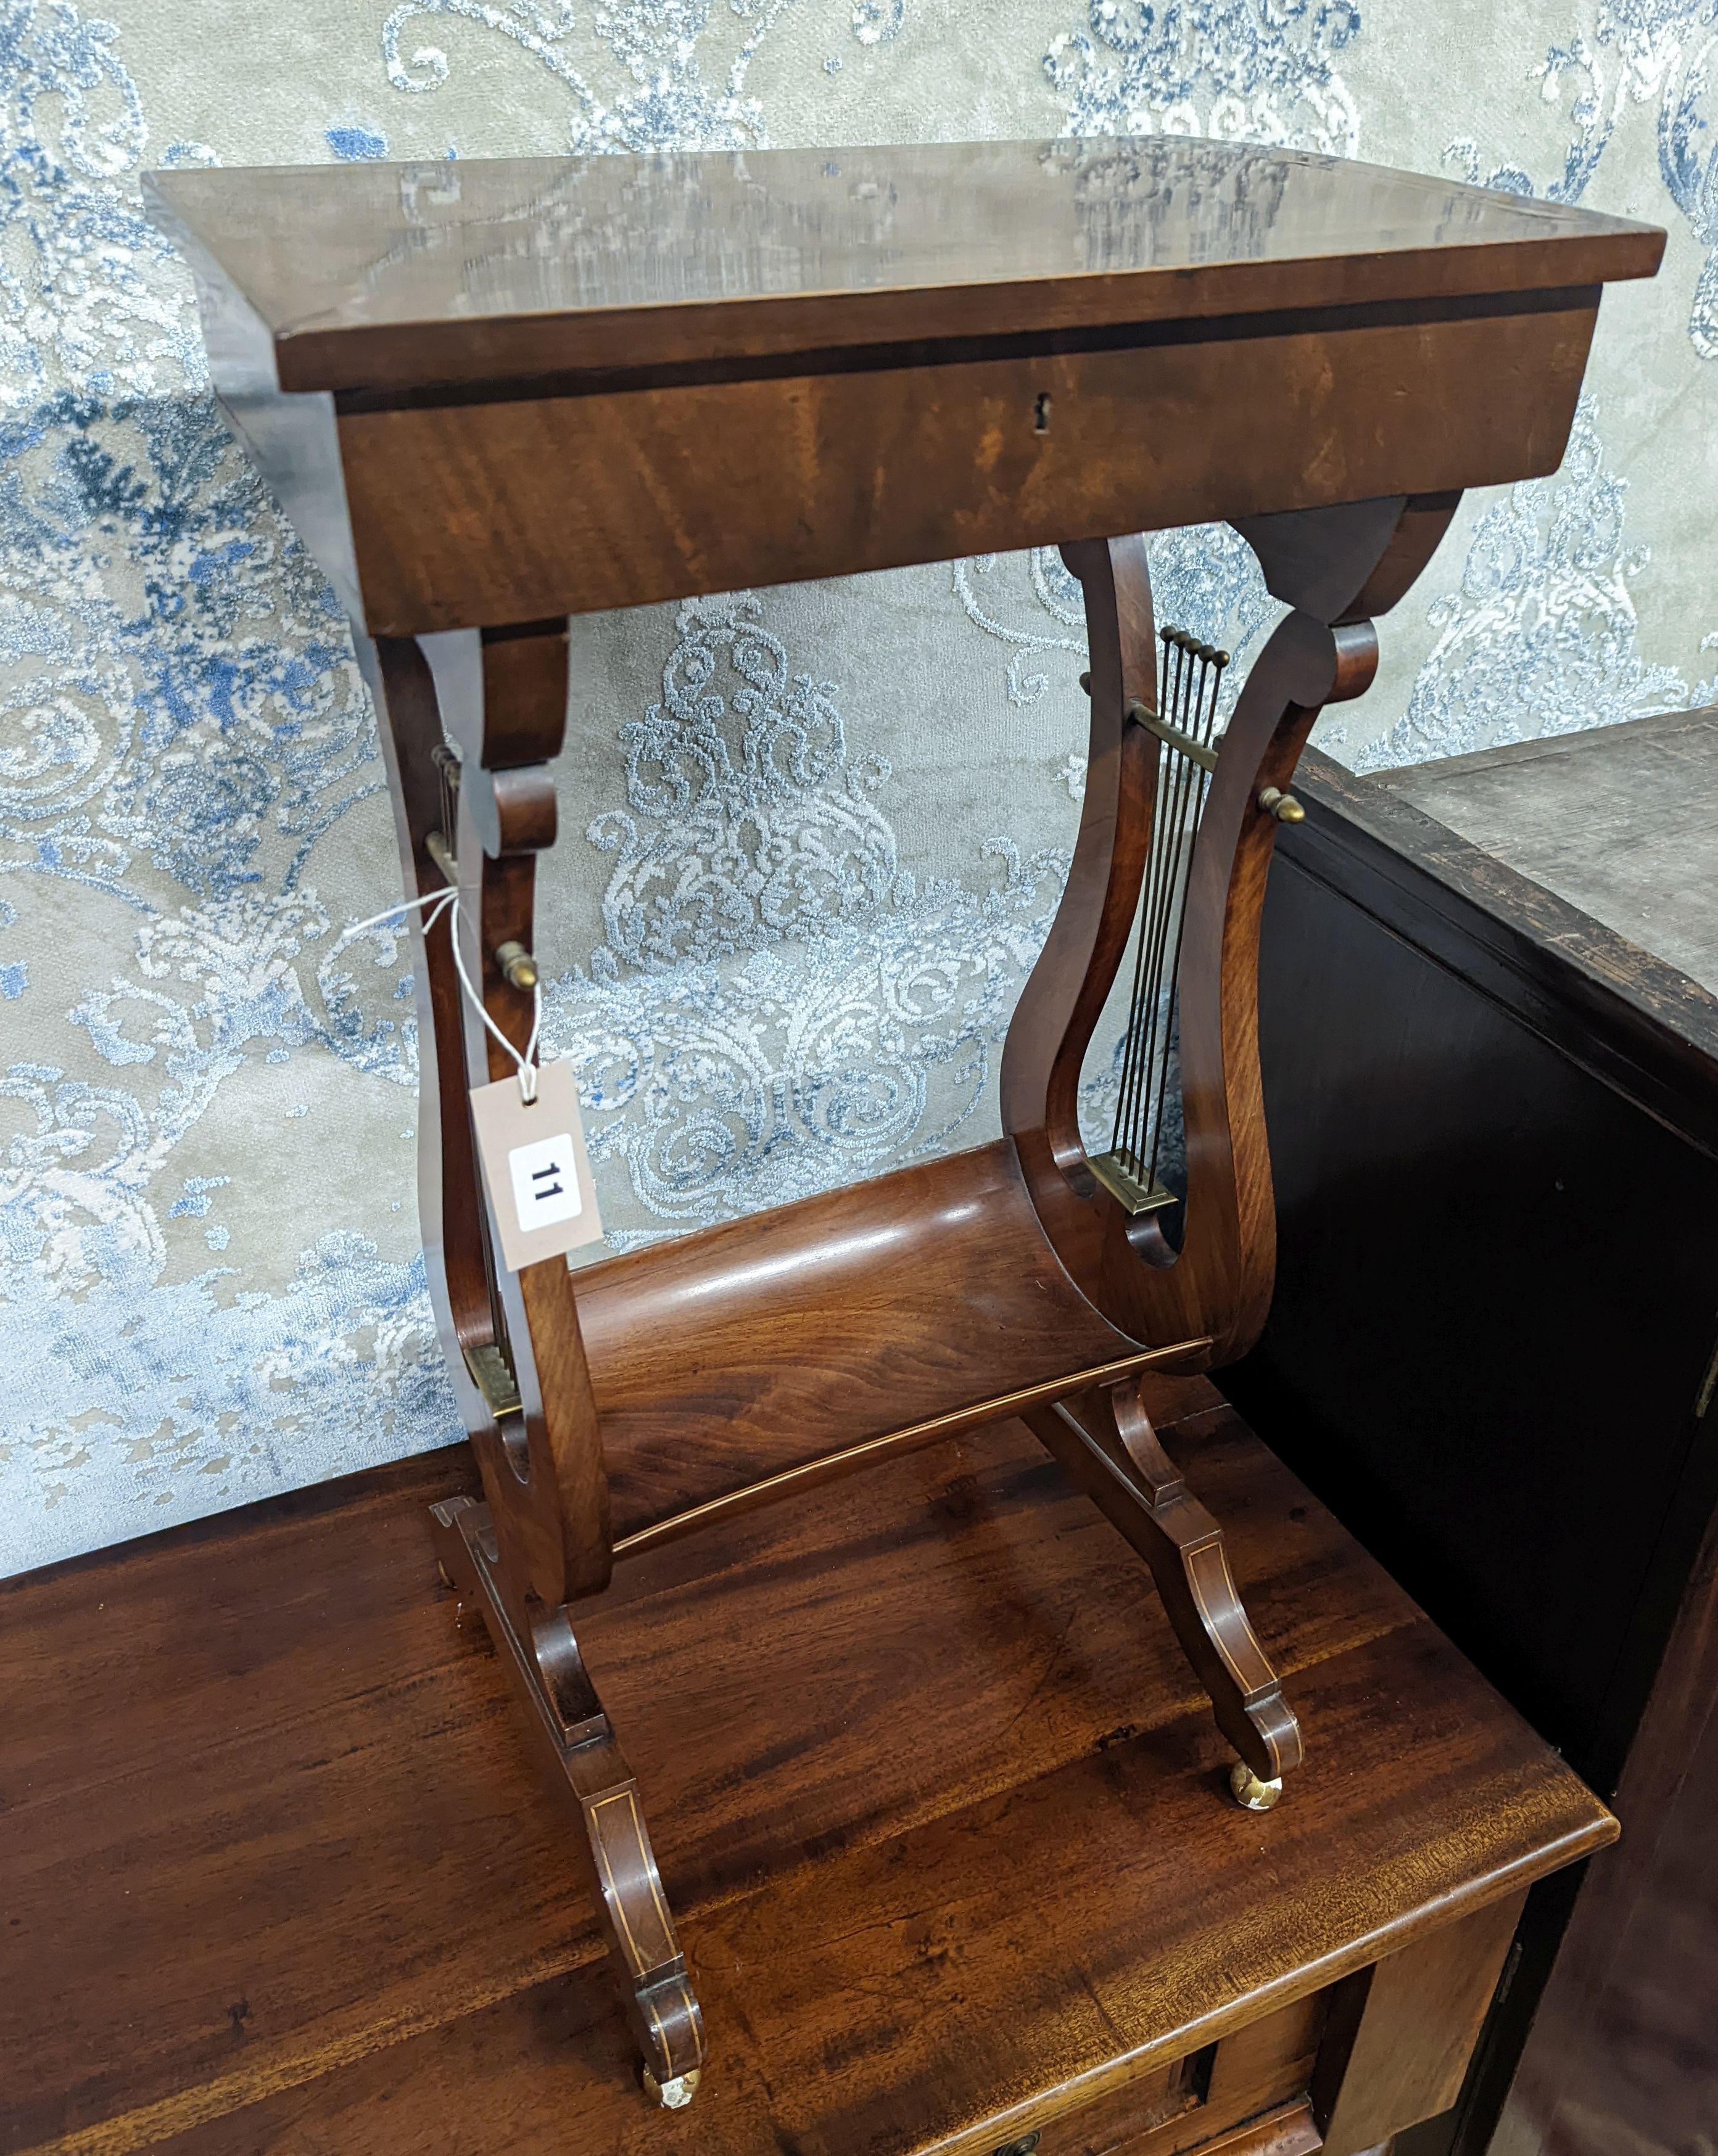 A reproduction Regency style mahogany work table on lyre supports, width 39cm, depth 27cm, height 69cm